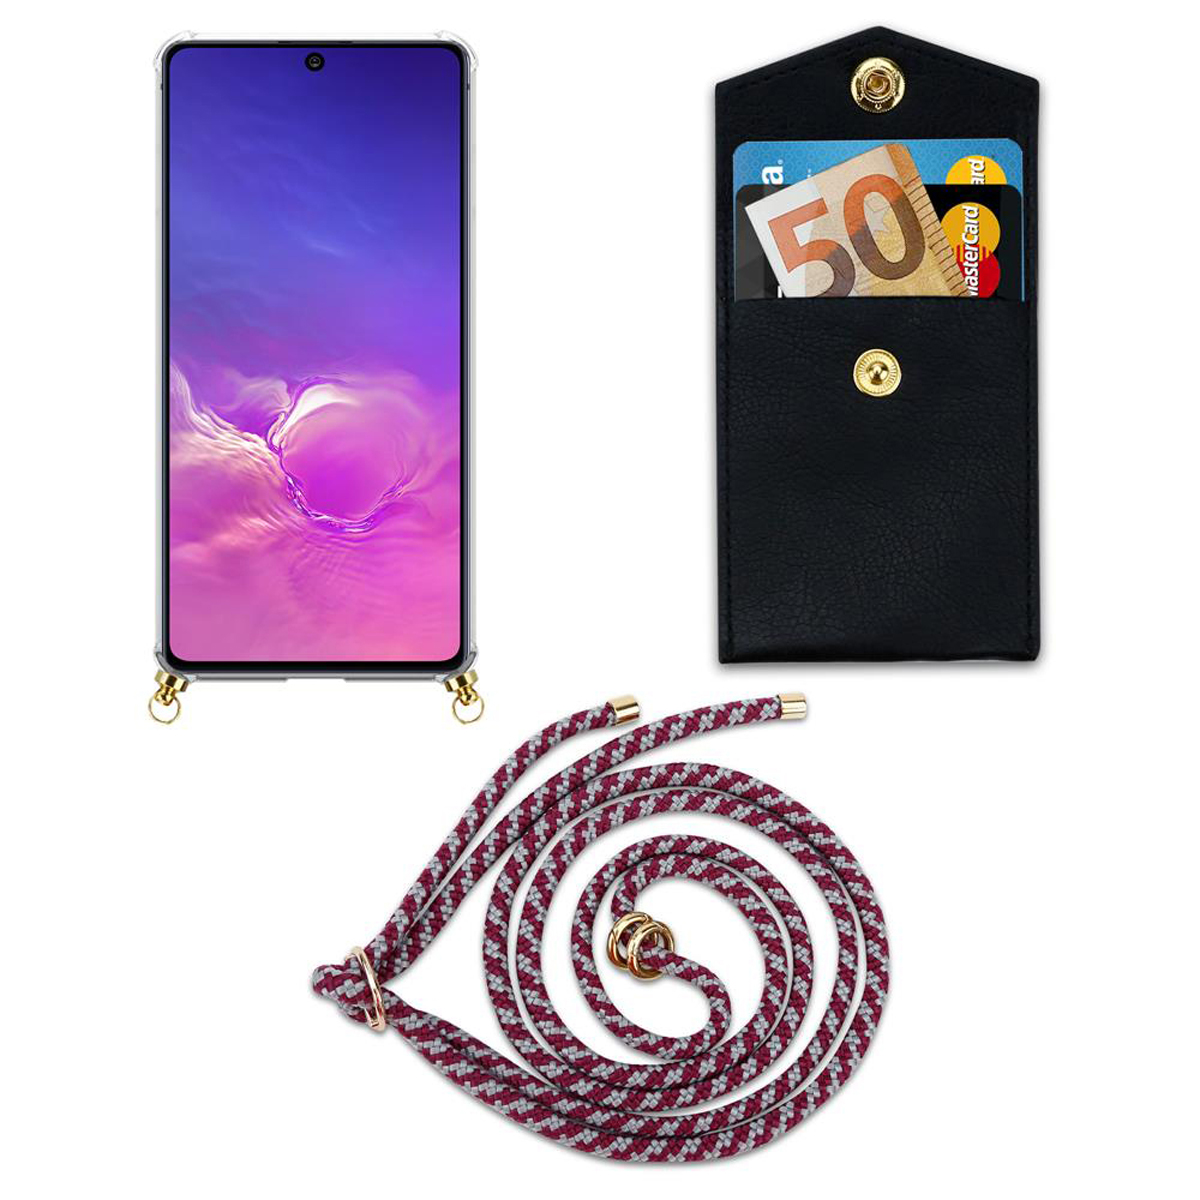 CADORABO Handy Kette mit Gold Galaxy LITE A91 S10 Hülle, Ringen, / Band Backcover, und abnehmbarer Kordel M80s, WEIß / ROT Samsung